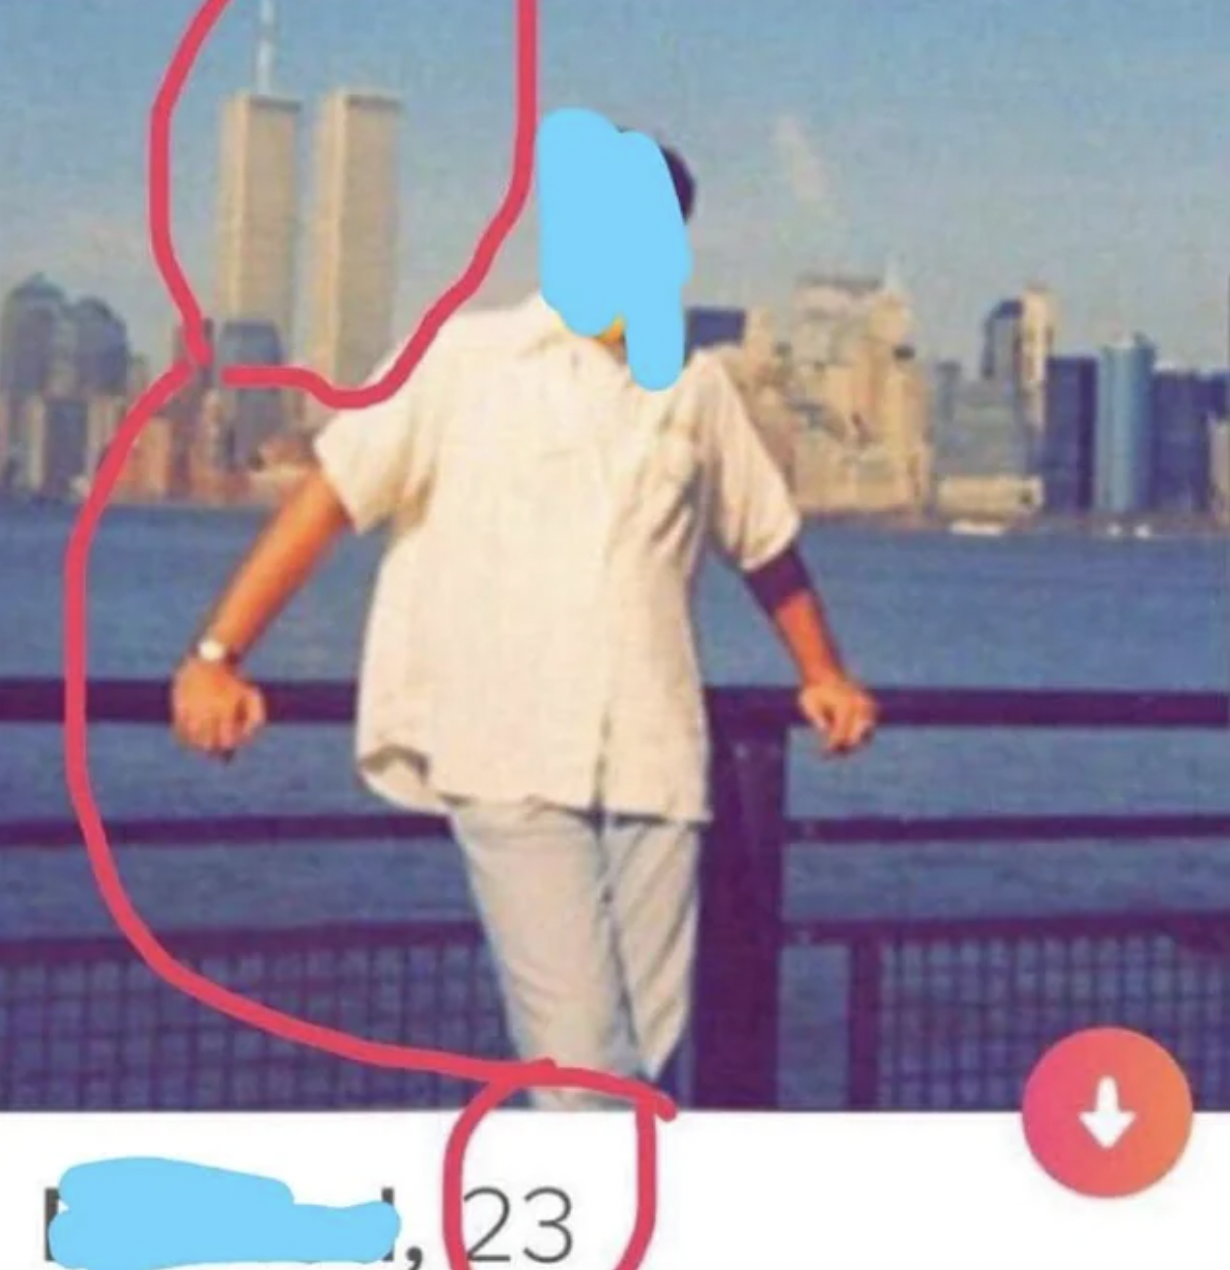 facepalms - lying about your age on tinder meme - 1,23